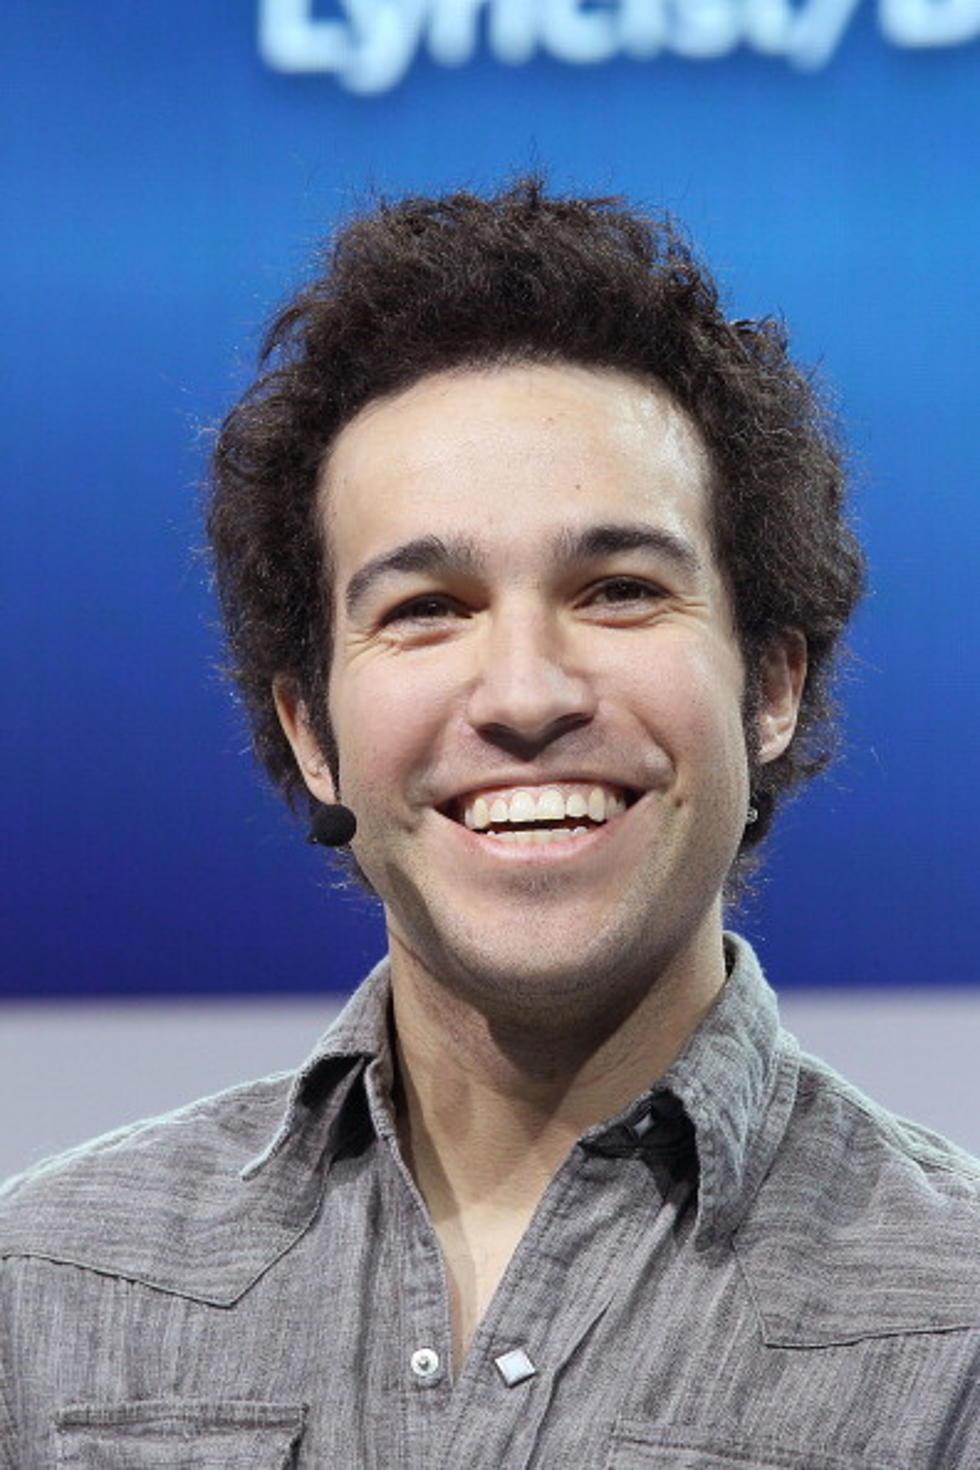 Pete Wentz&#8217;s New Hairstyle &#8211; What Do You Think? [PHOTO]